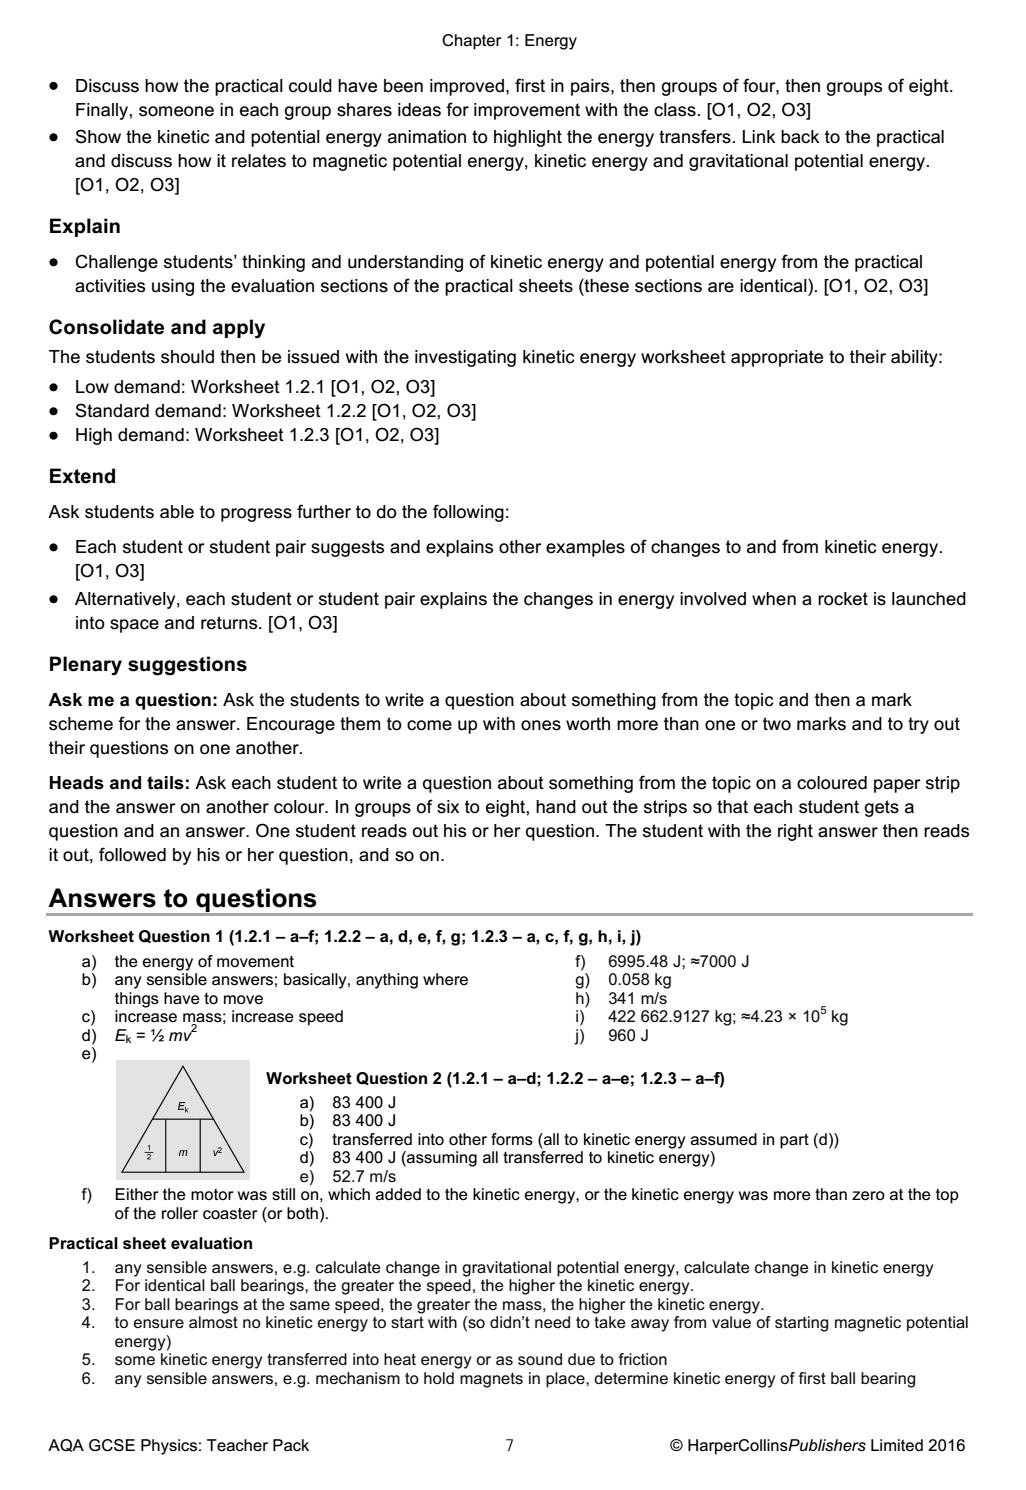 Potential and Kinetic Energy Worksheet Aqa Gcse 9 1 Physics Teacher Pack by Collins issuu